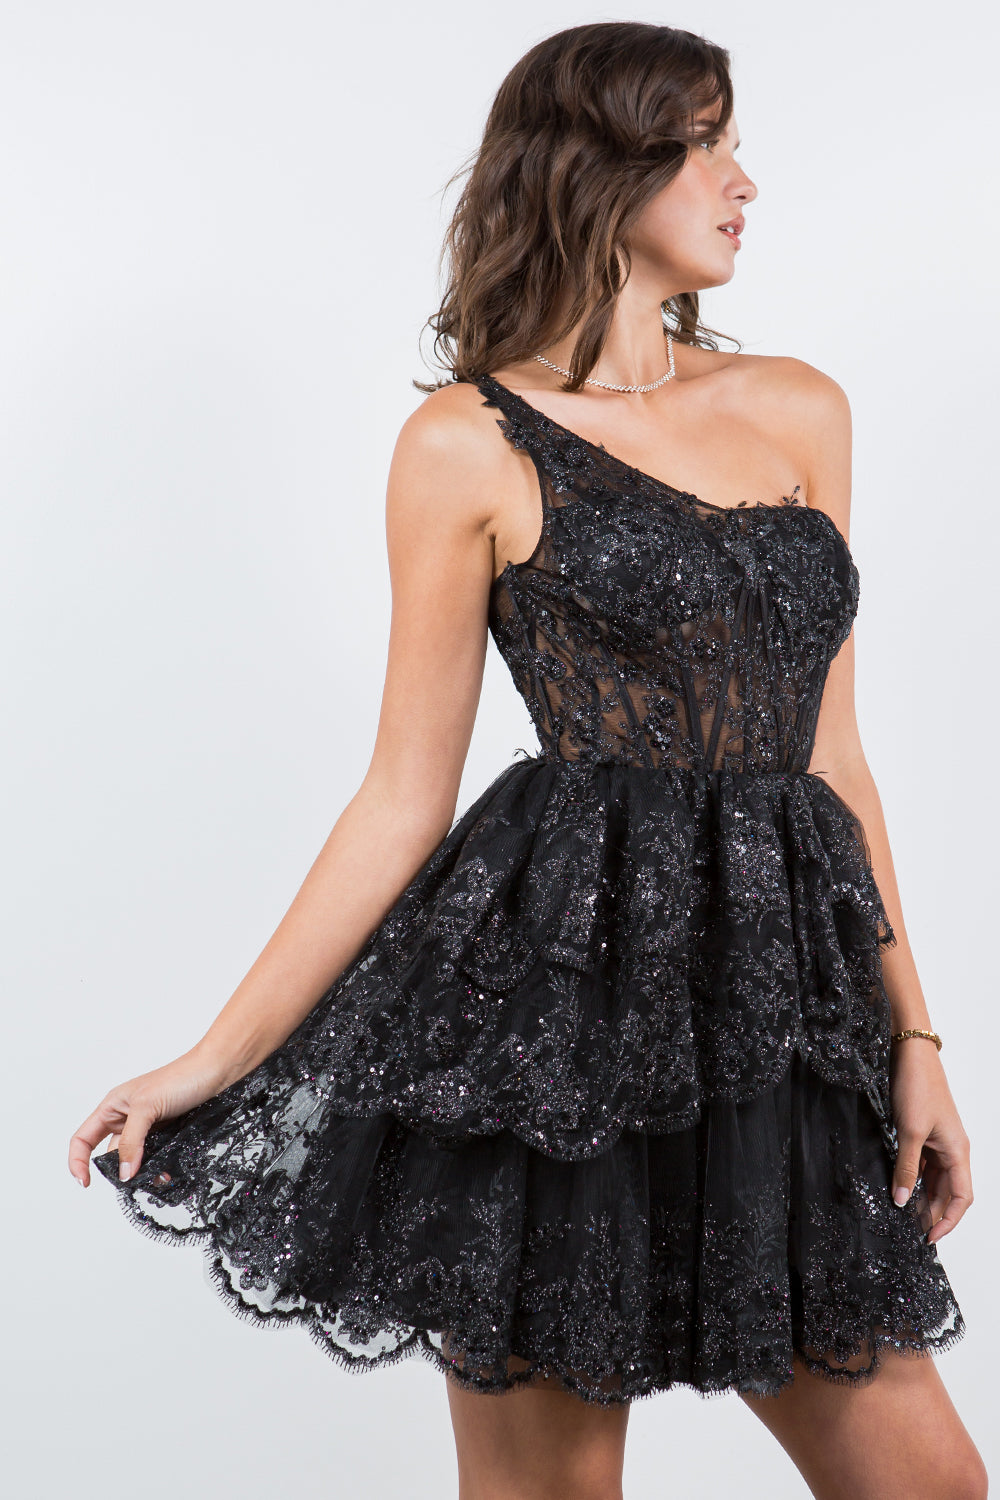 Short One Shoulder Tiered Dress by Cinderella Couture 5132J